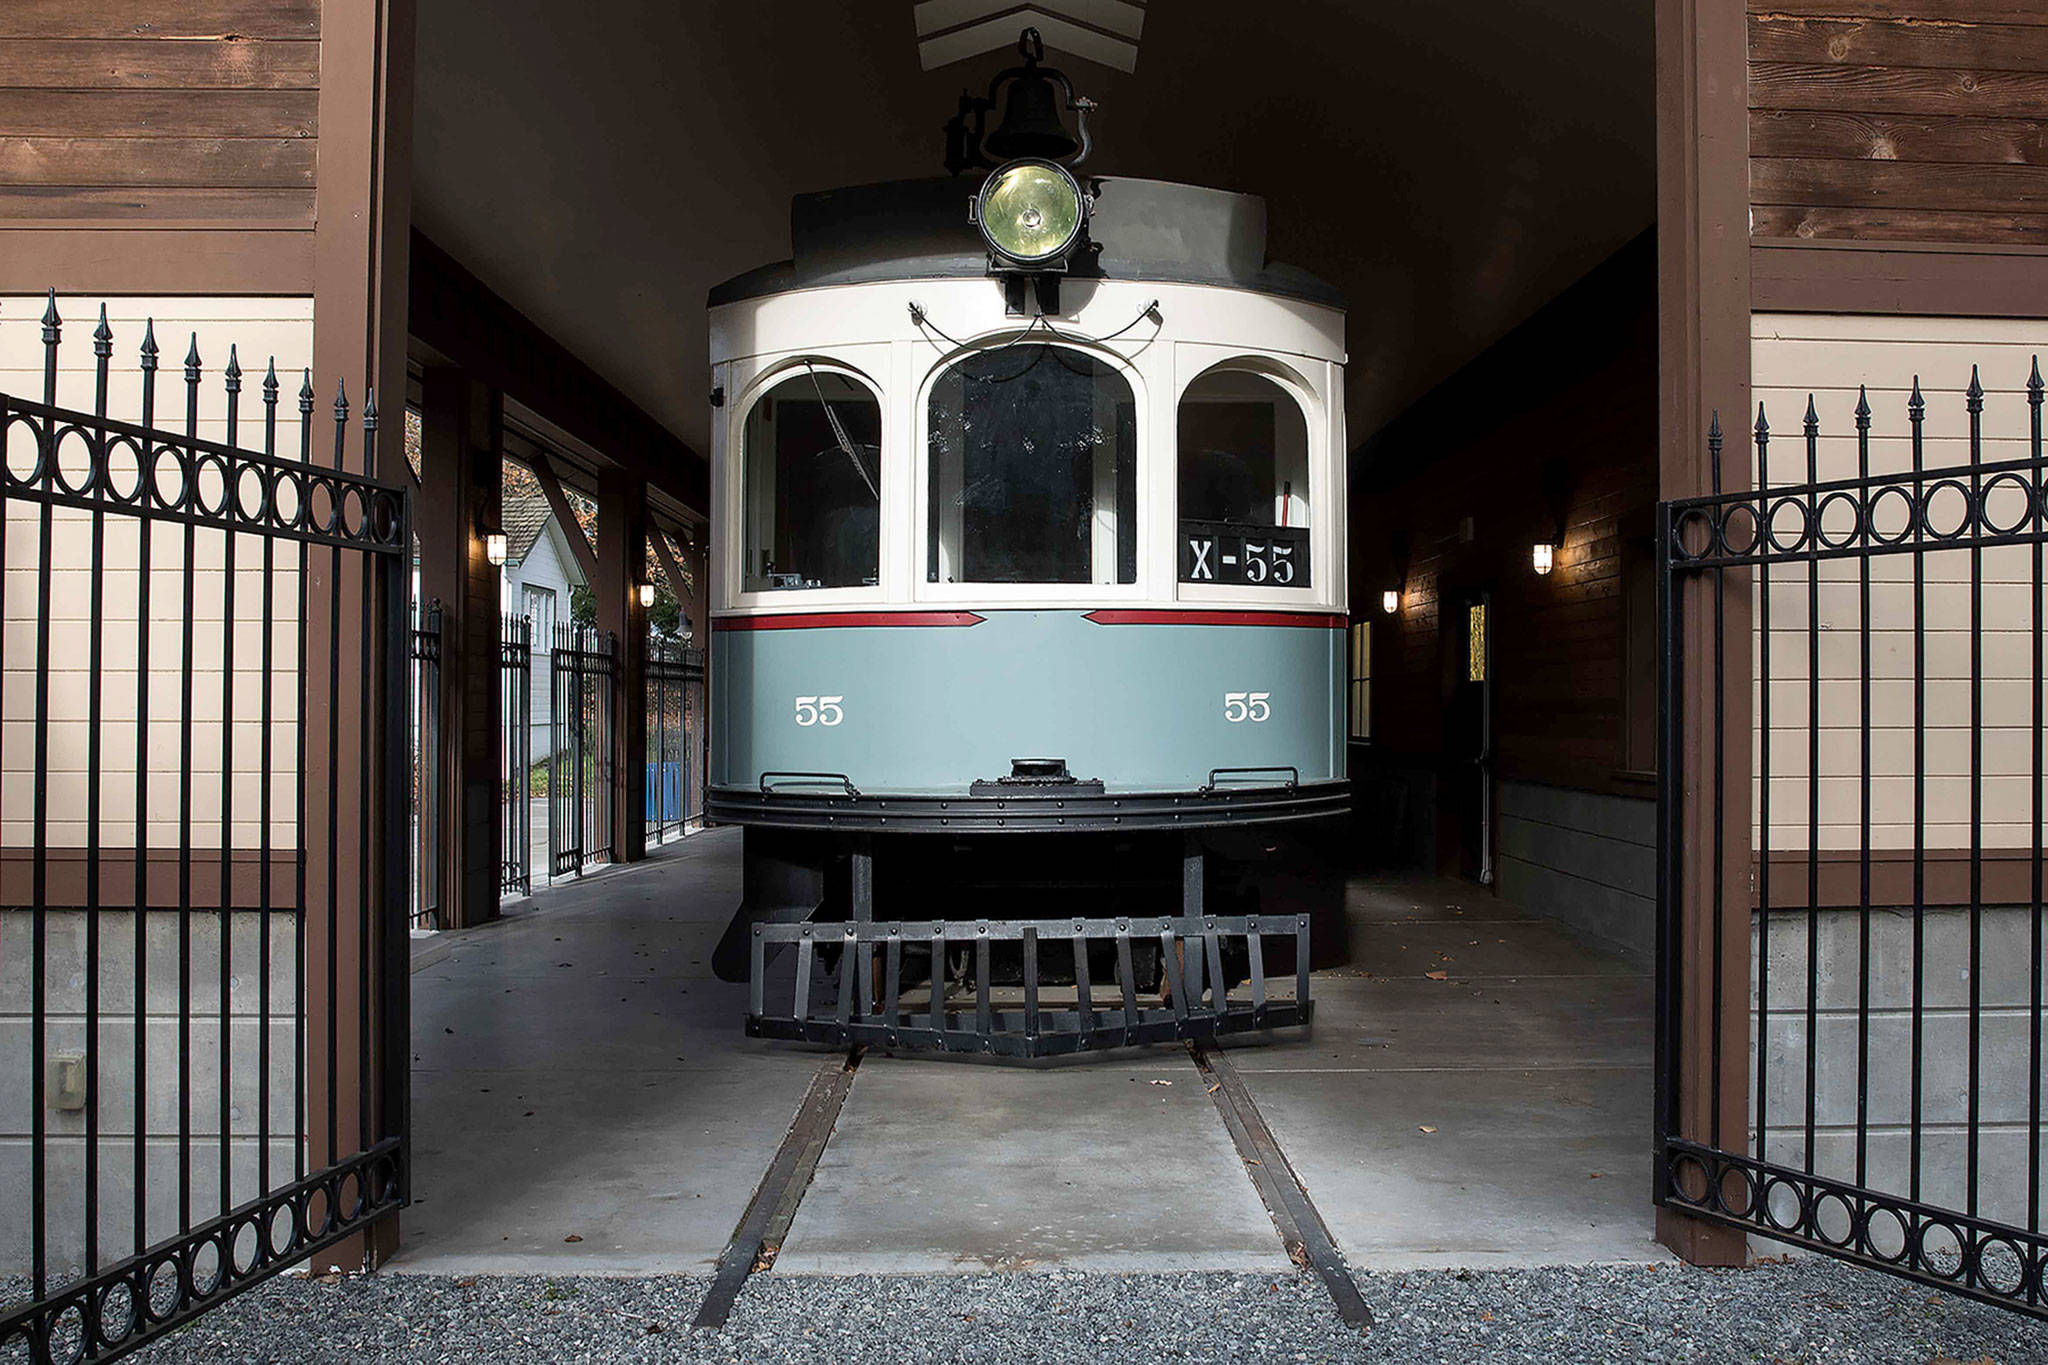 Trolley No. 55 is on displayed at the Lynnwood-Alderwood Manor Heritage Association. It was one of handful of cars that ran the Interurban Railway between Seattle and Everett. (Lizz Giordano / The Herald)